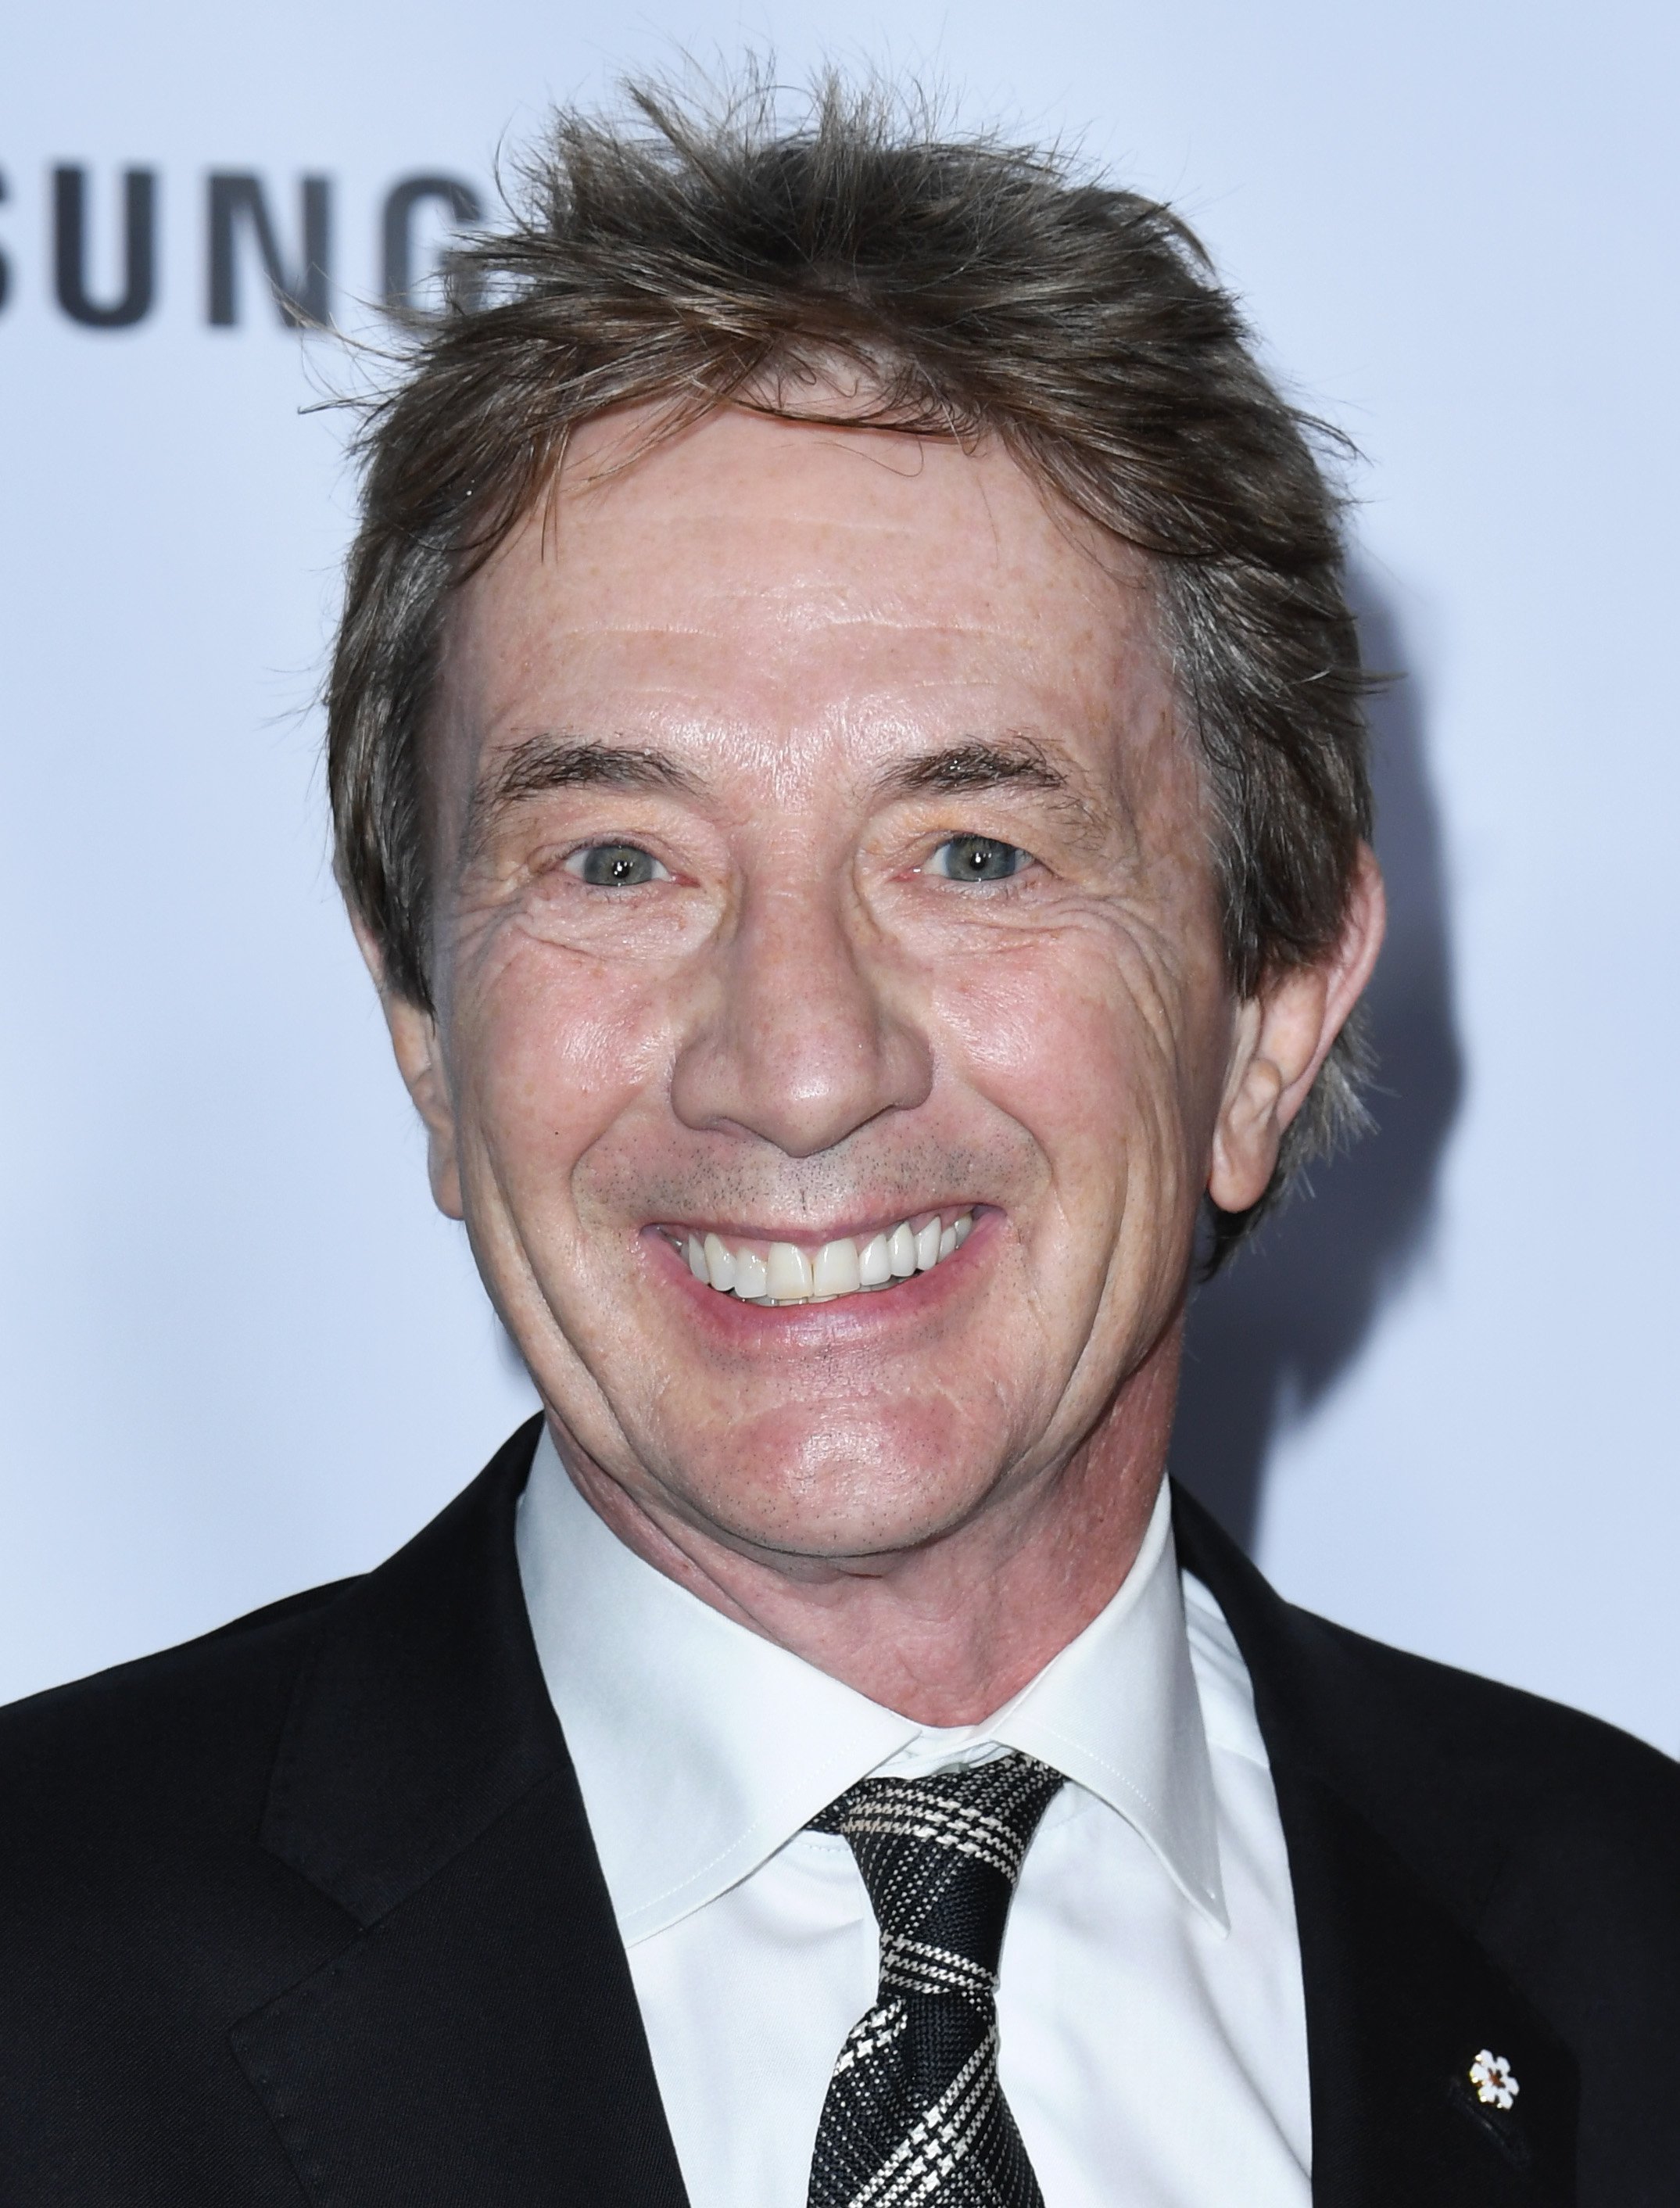 Martin Short attends US-Ireland Alliance's 15th Annual Oscar Wilde Awards at Bad Robot on February 06, 2020 in Santa Monica, California | Source: Getty Images 